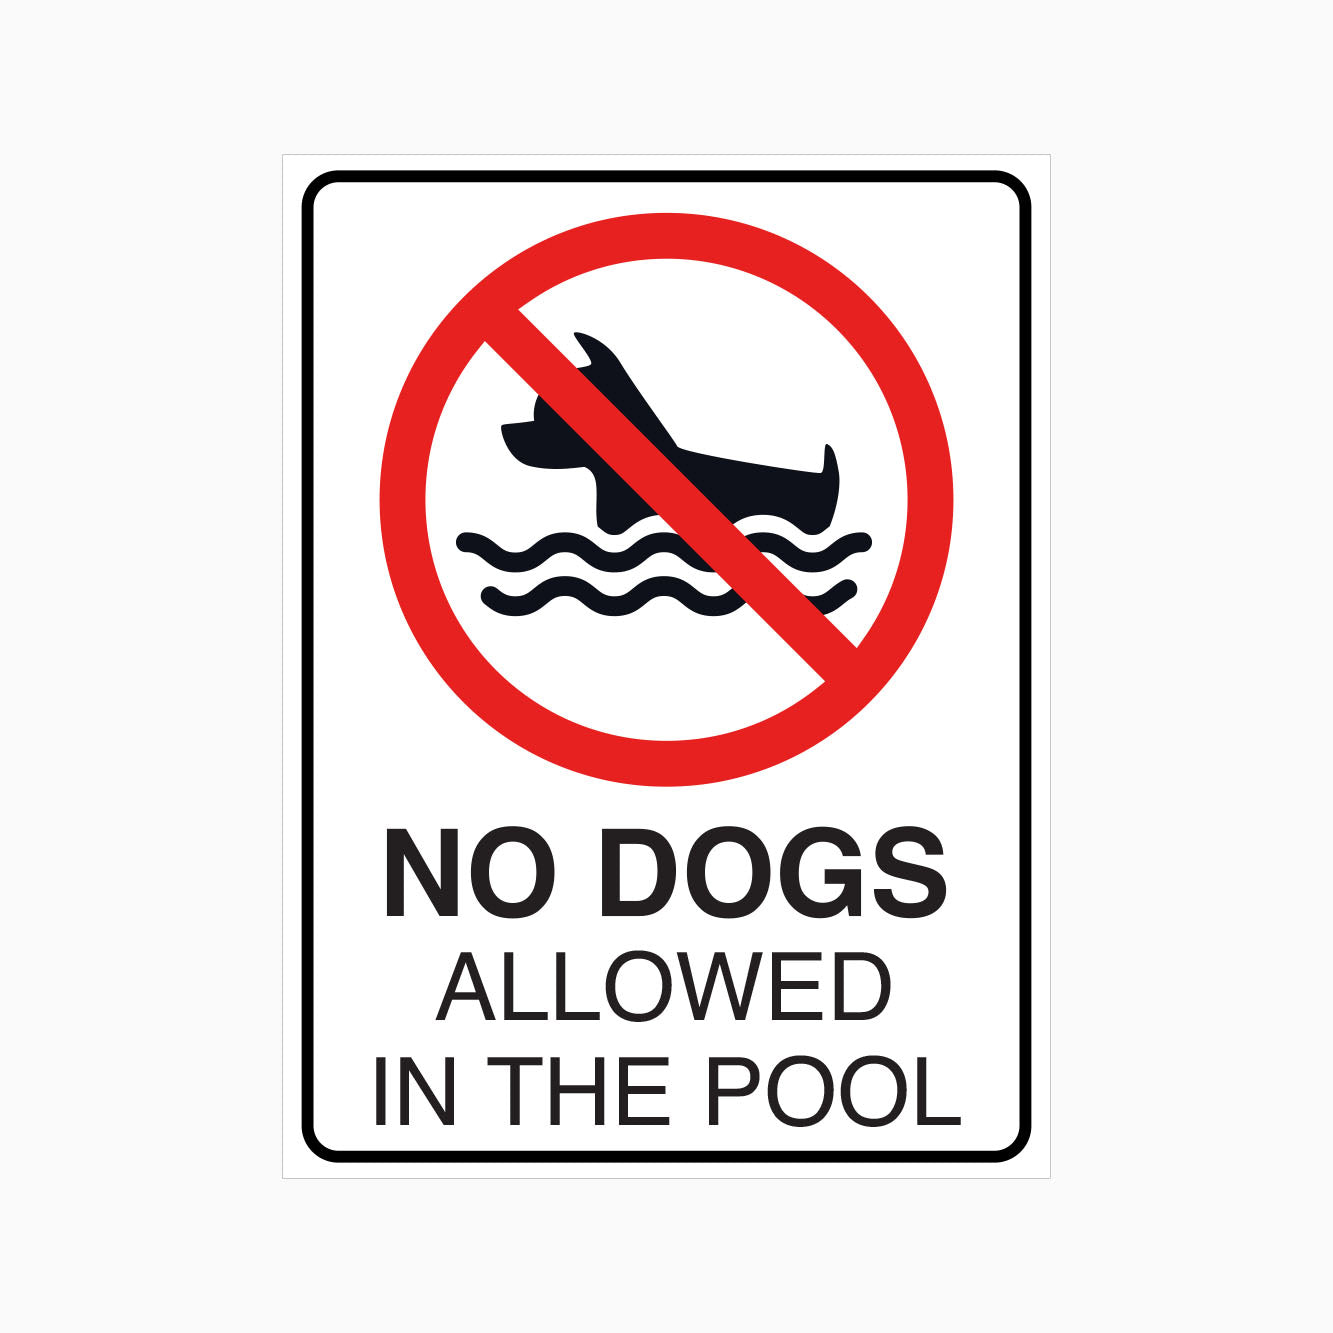 NO DOGS ALLOWED IN THE POOL SIGN